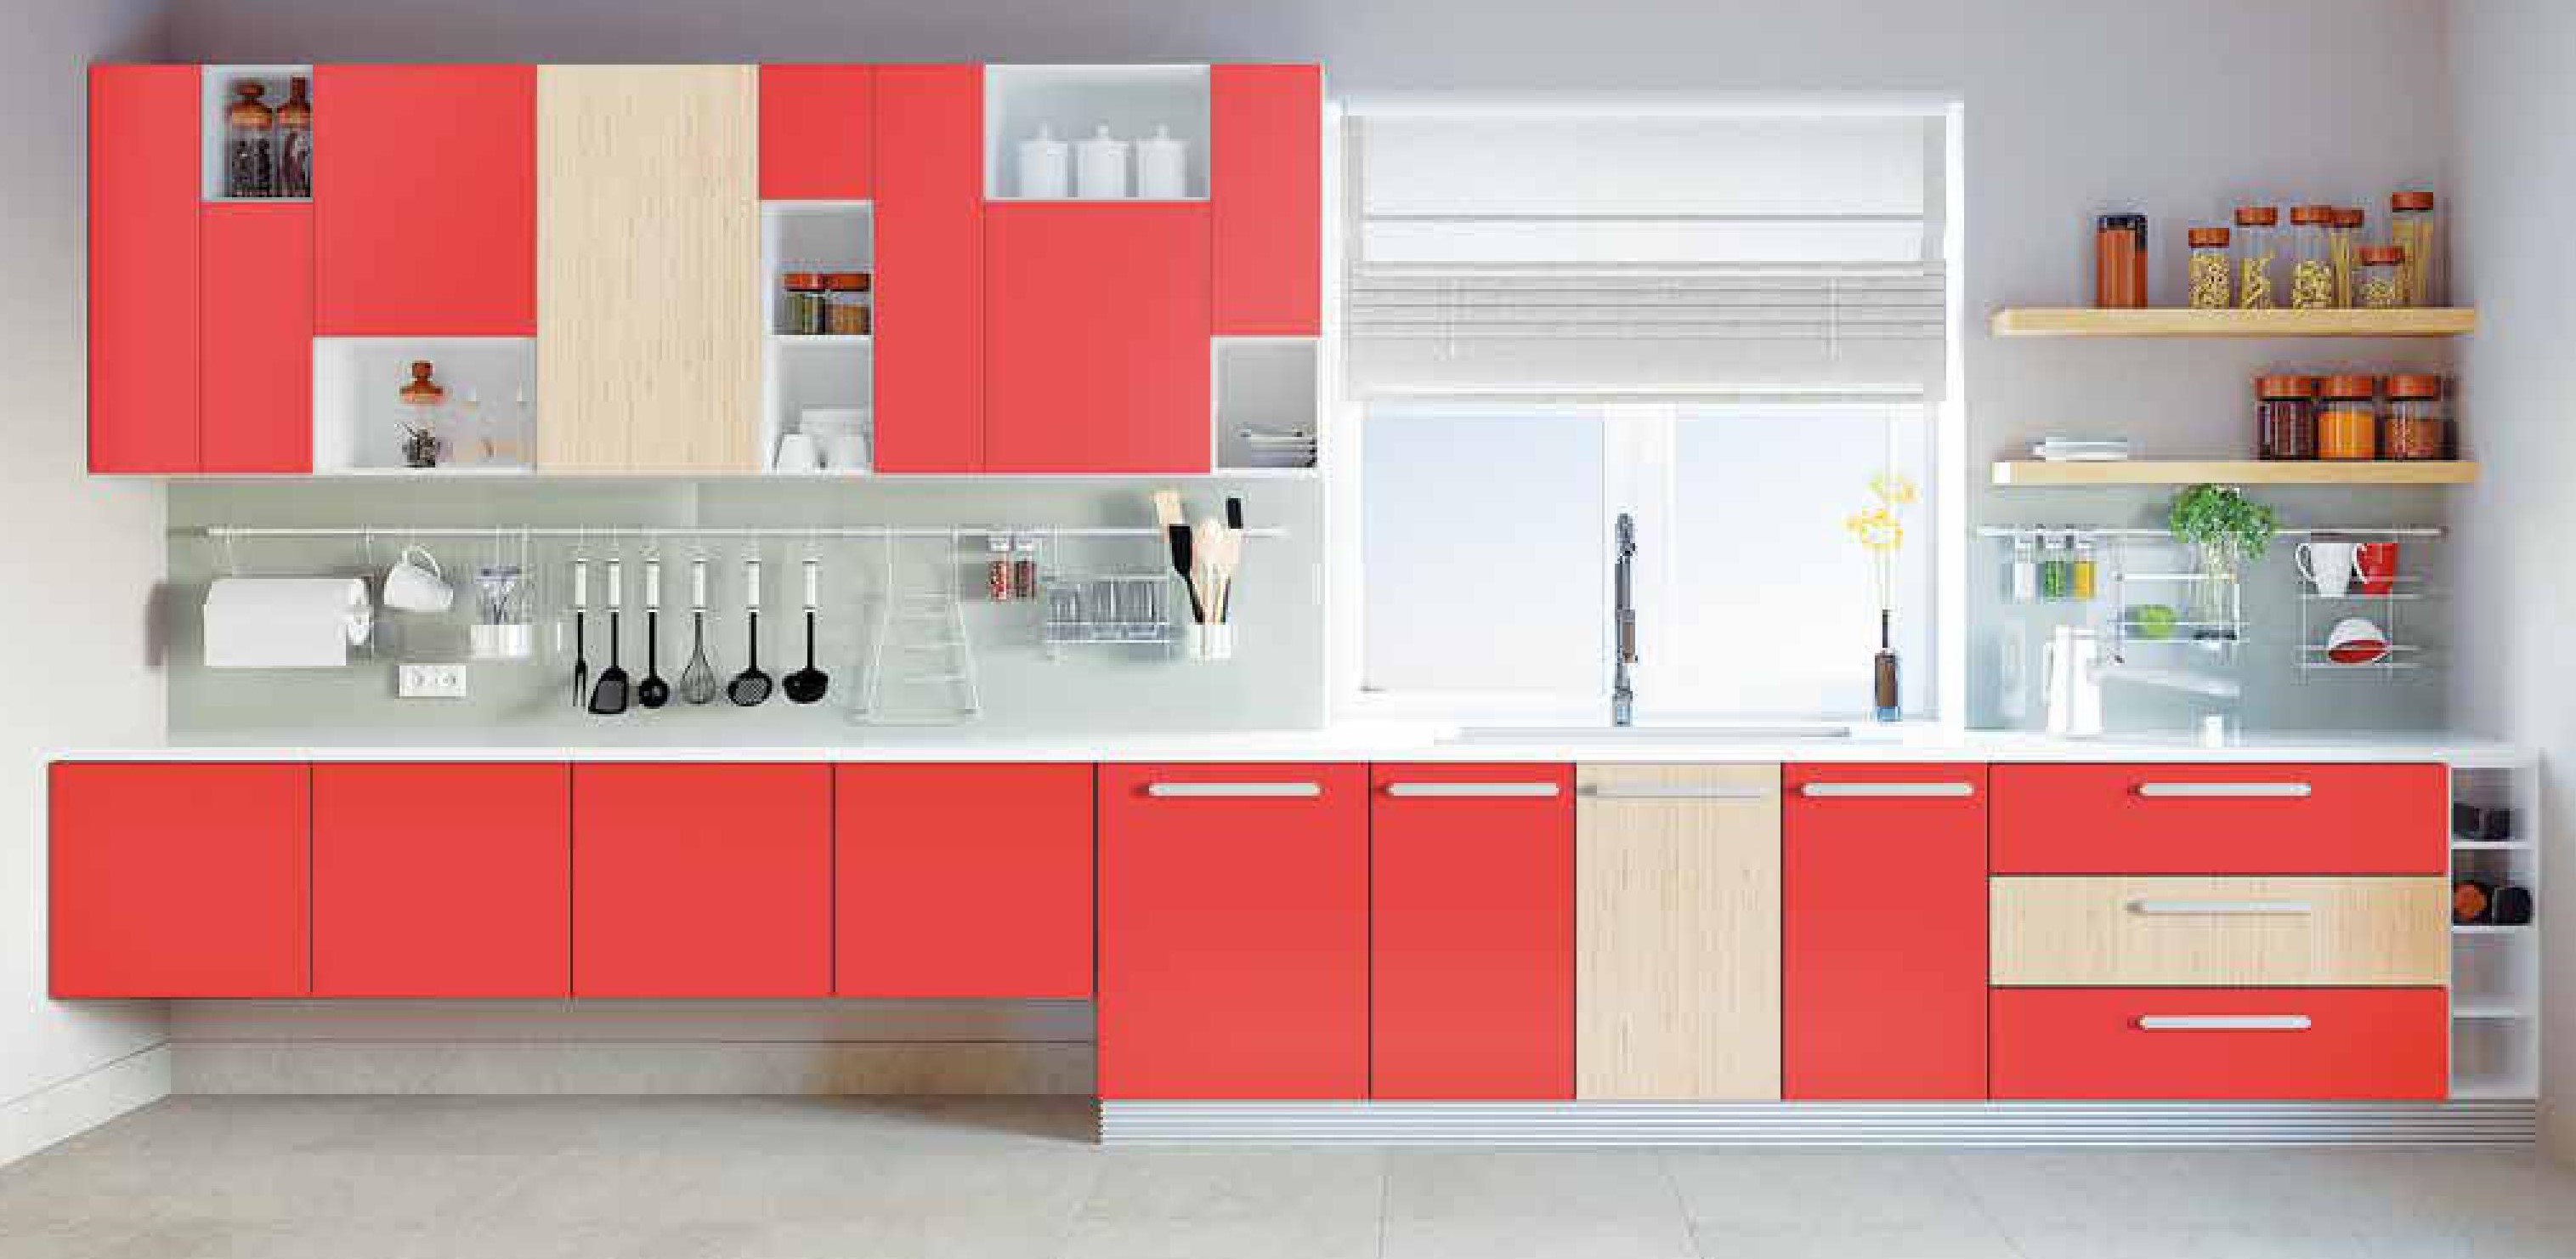 10 Kitchen Laminate Designs For Your Home